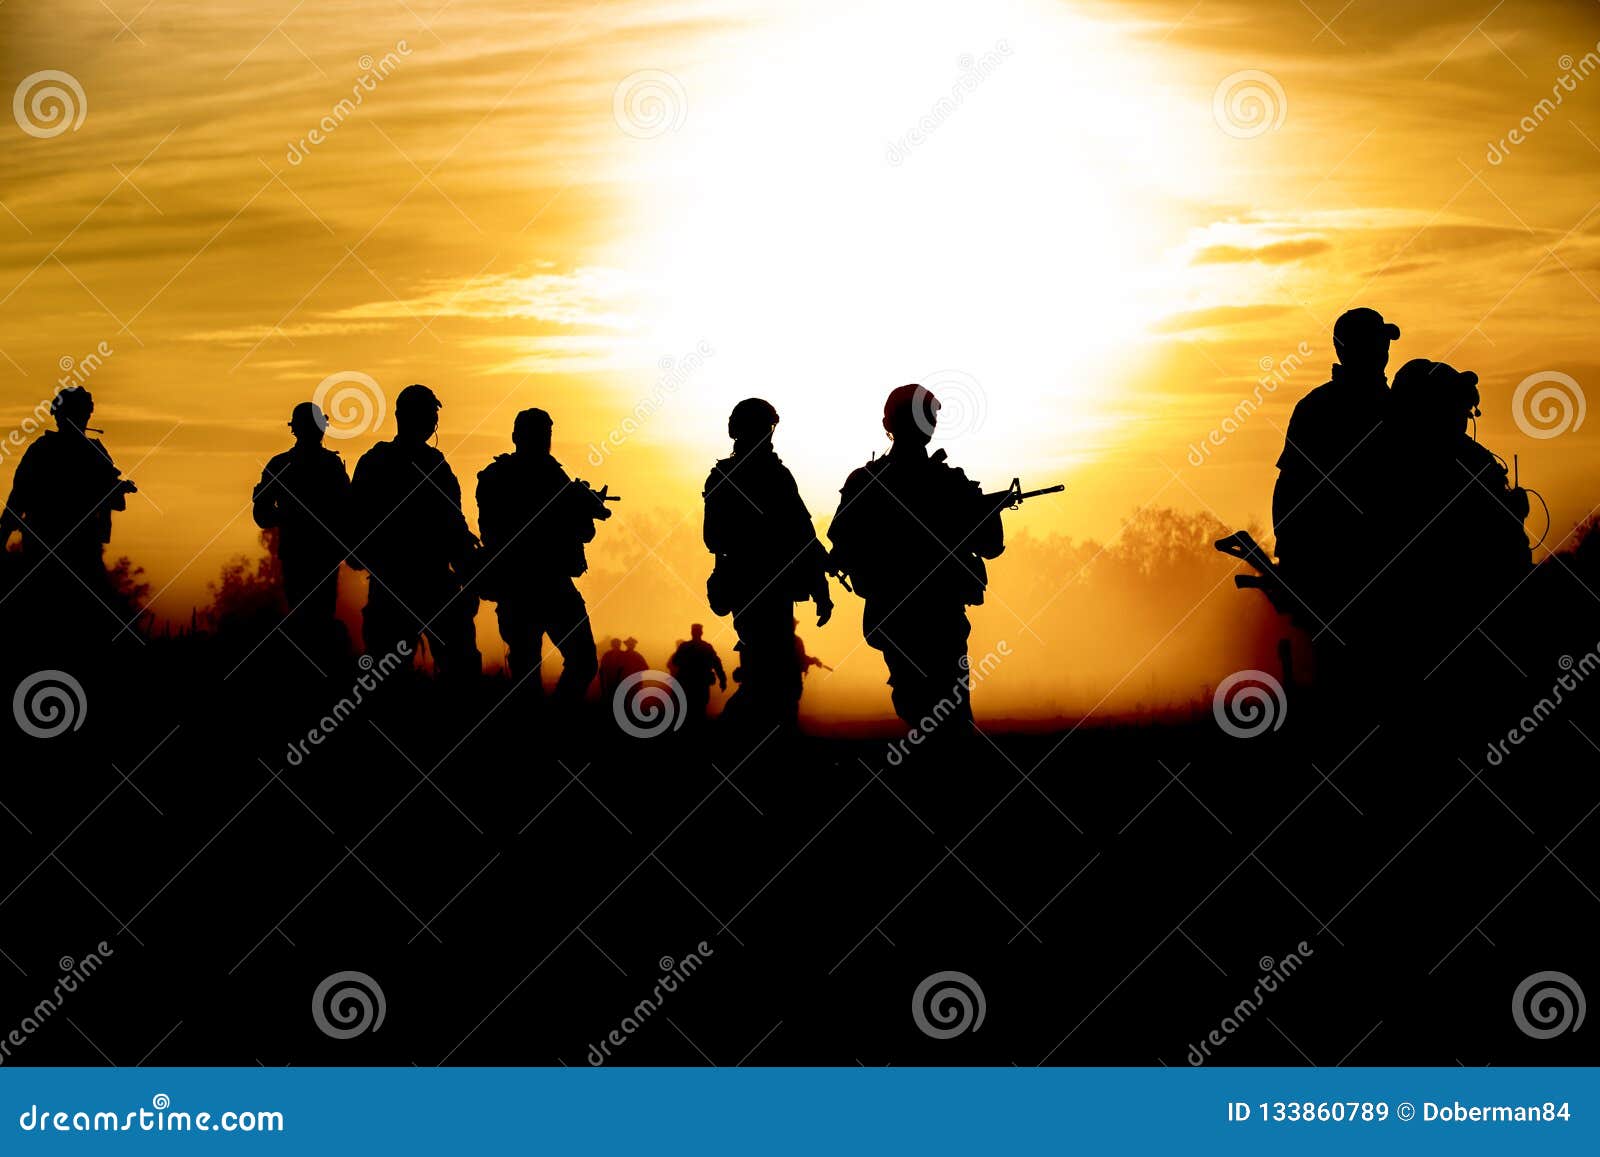 silhouette action soldiers walking hold weapons the background is smoke and sunset and white balance ship effect dark